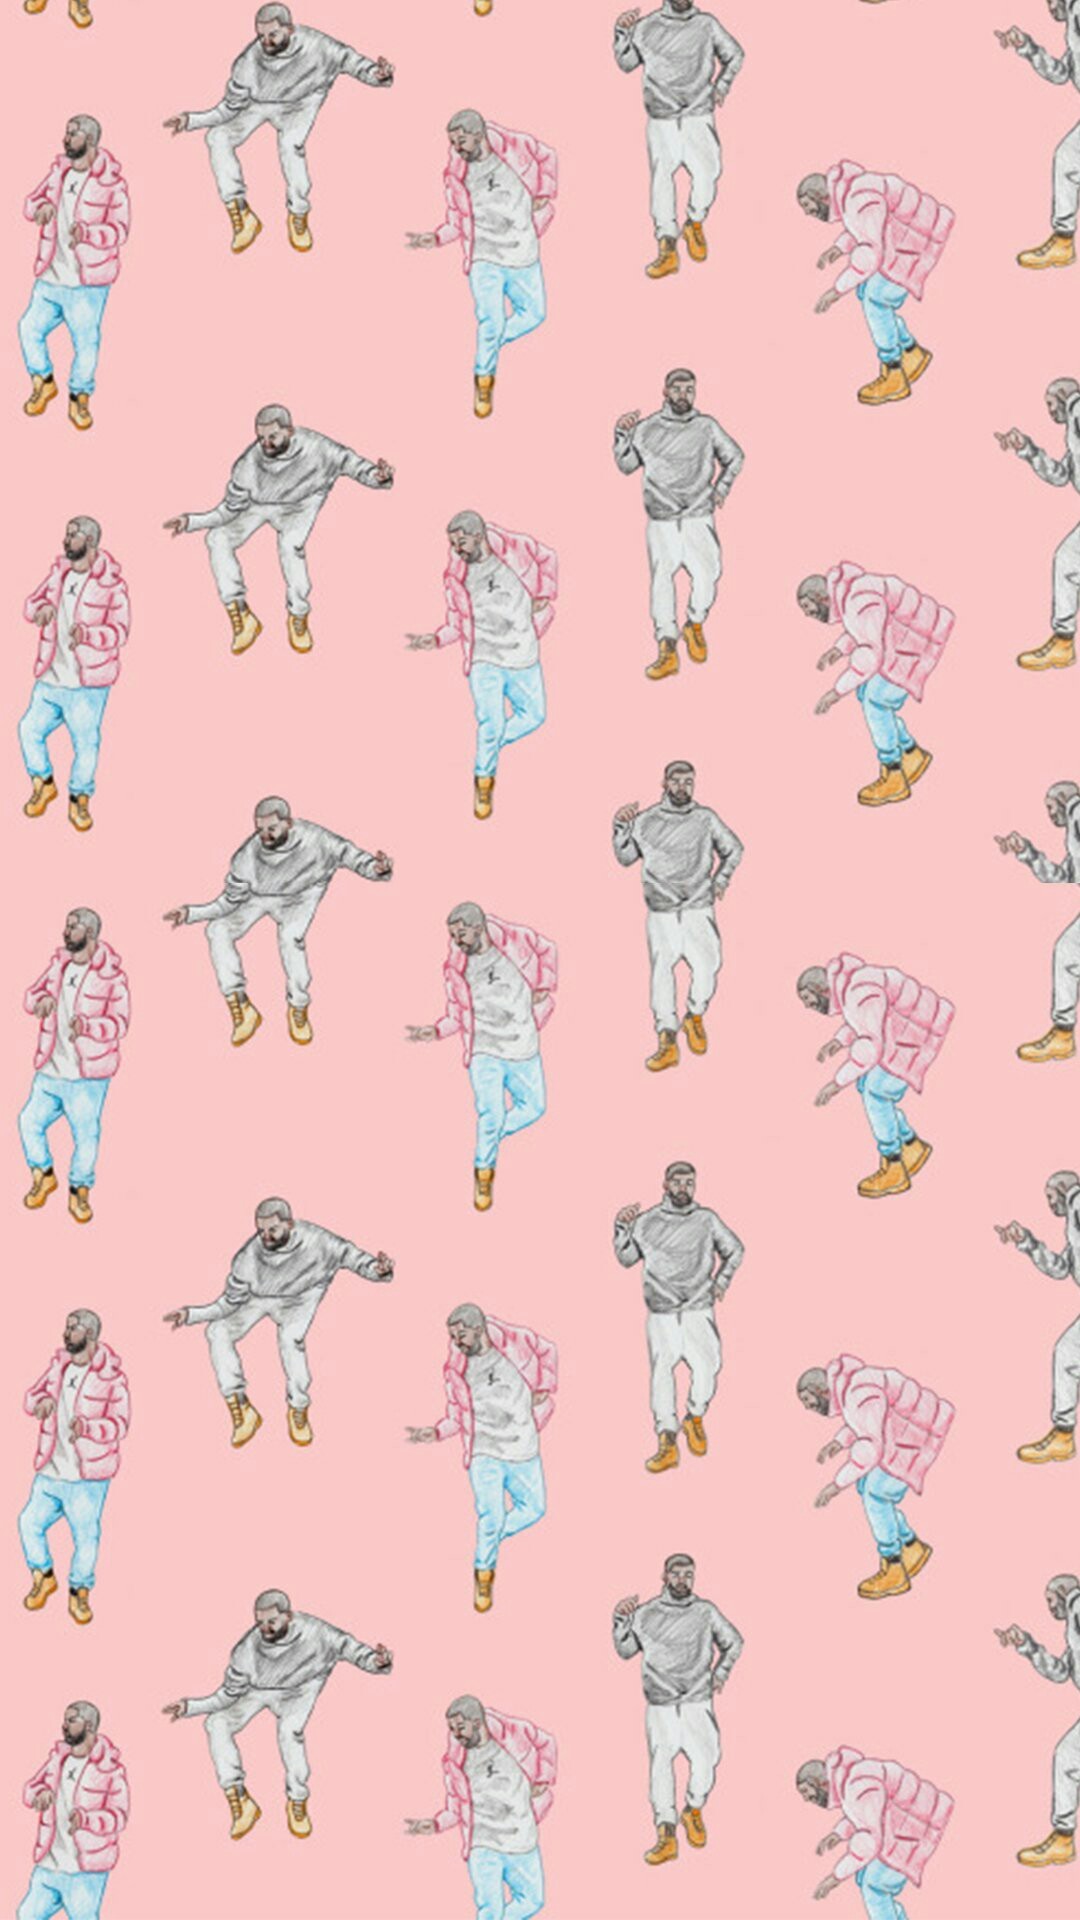 1080x1920 Drake Hotline Bling Patter Phone wallpaper/background Source: Unknown